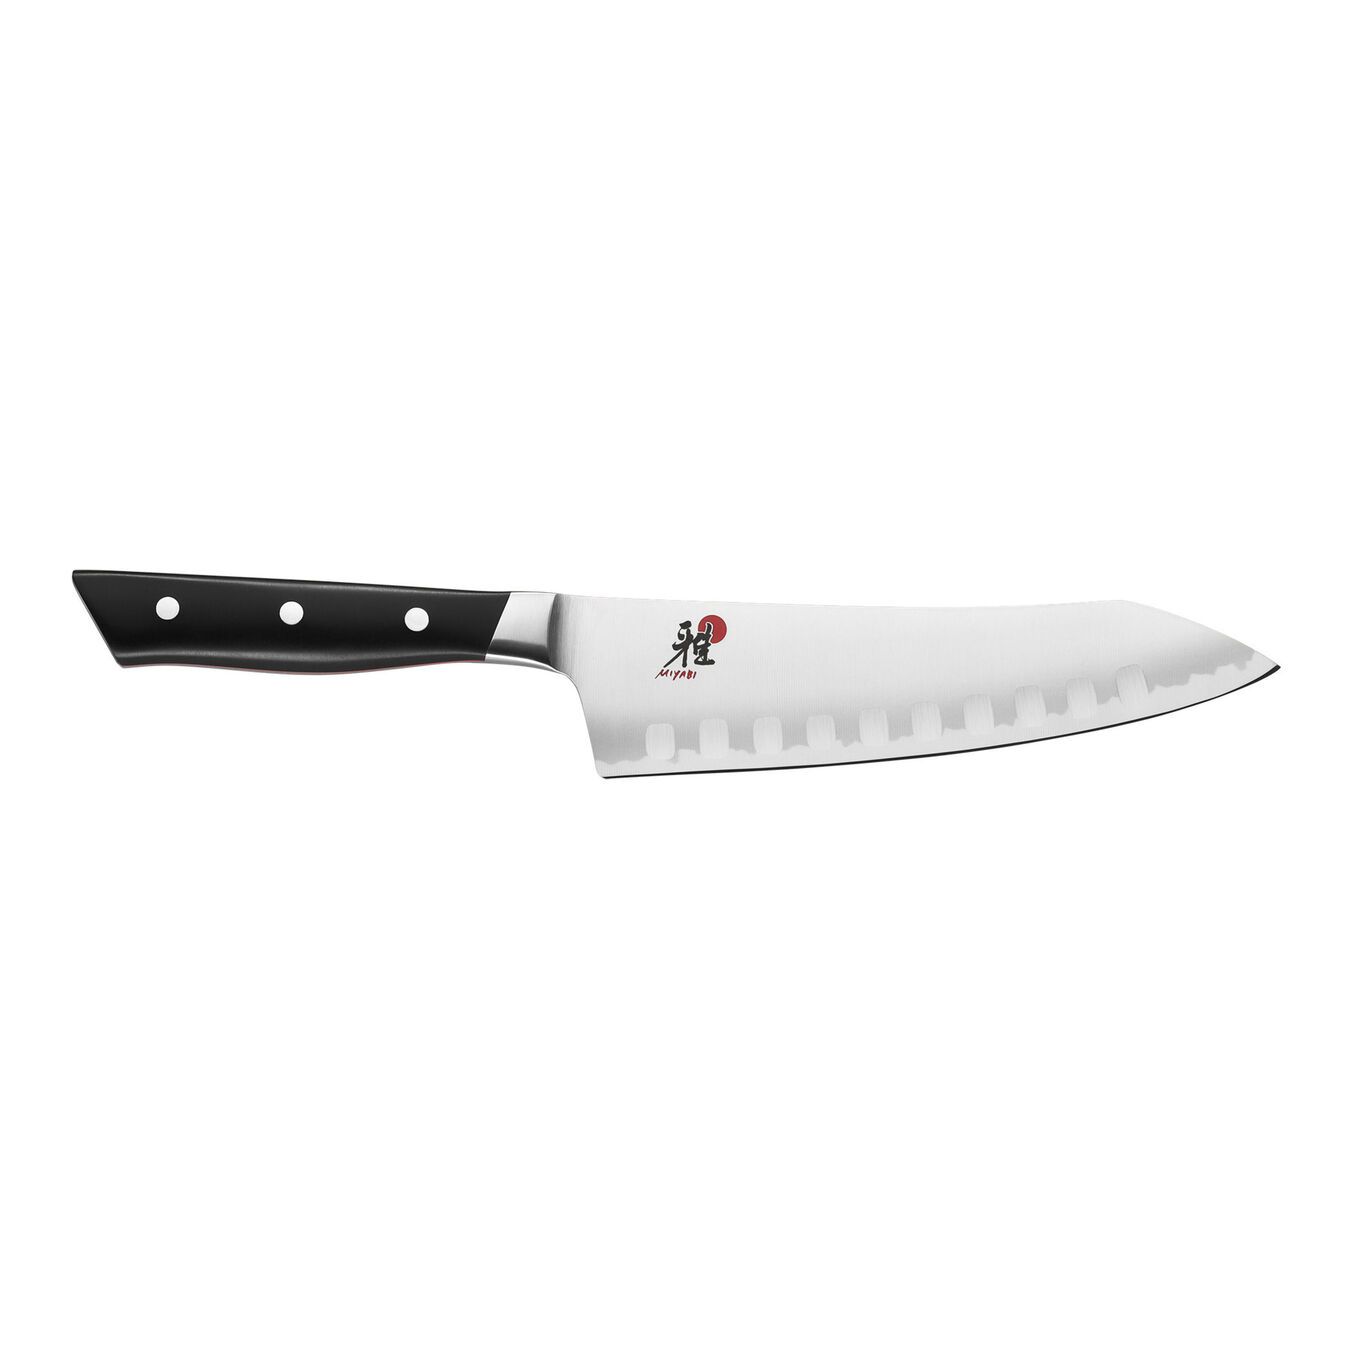 7-inch Rocking santoku | The ZWILLING Group Cutlery & Cookware